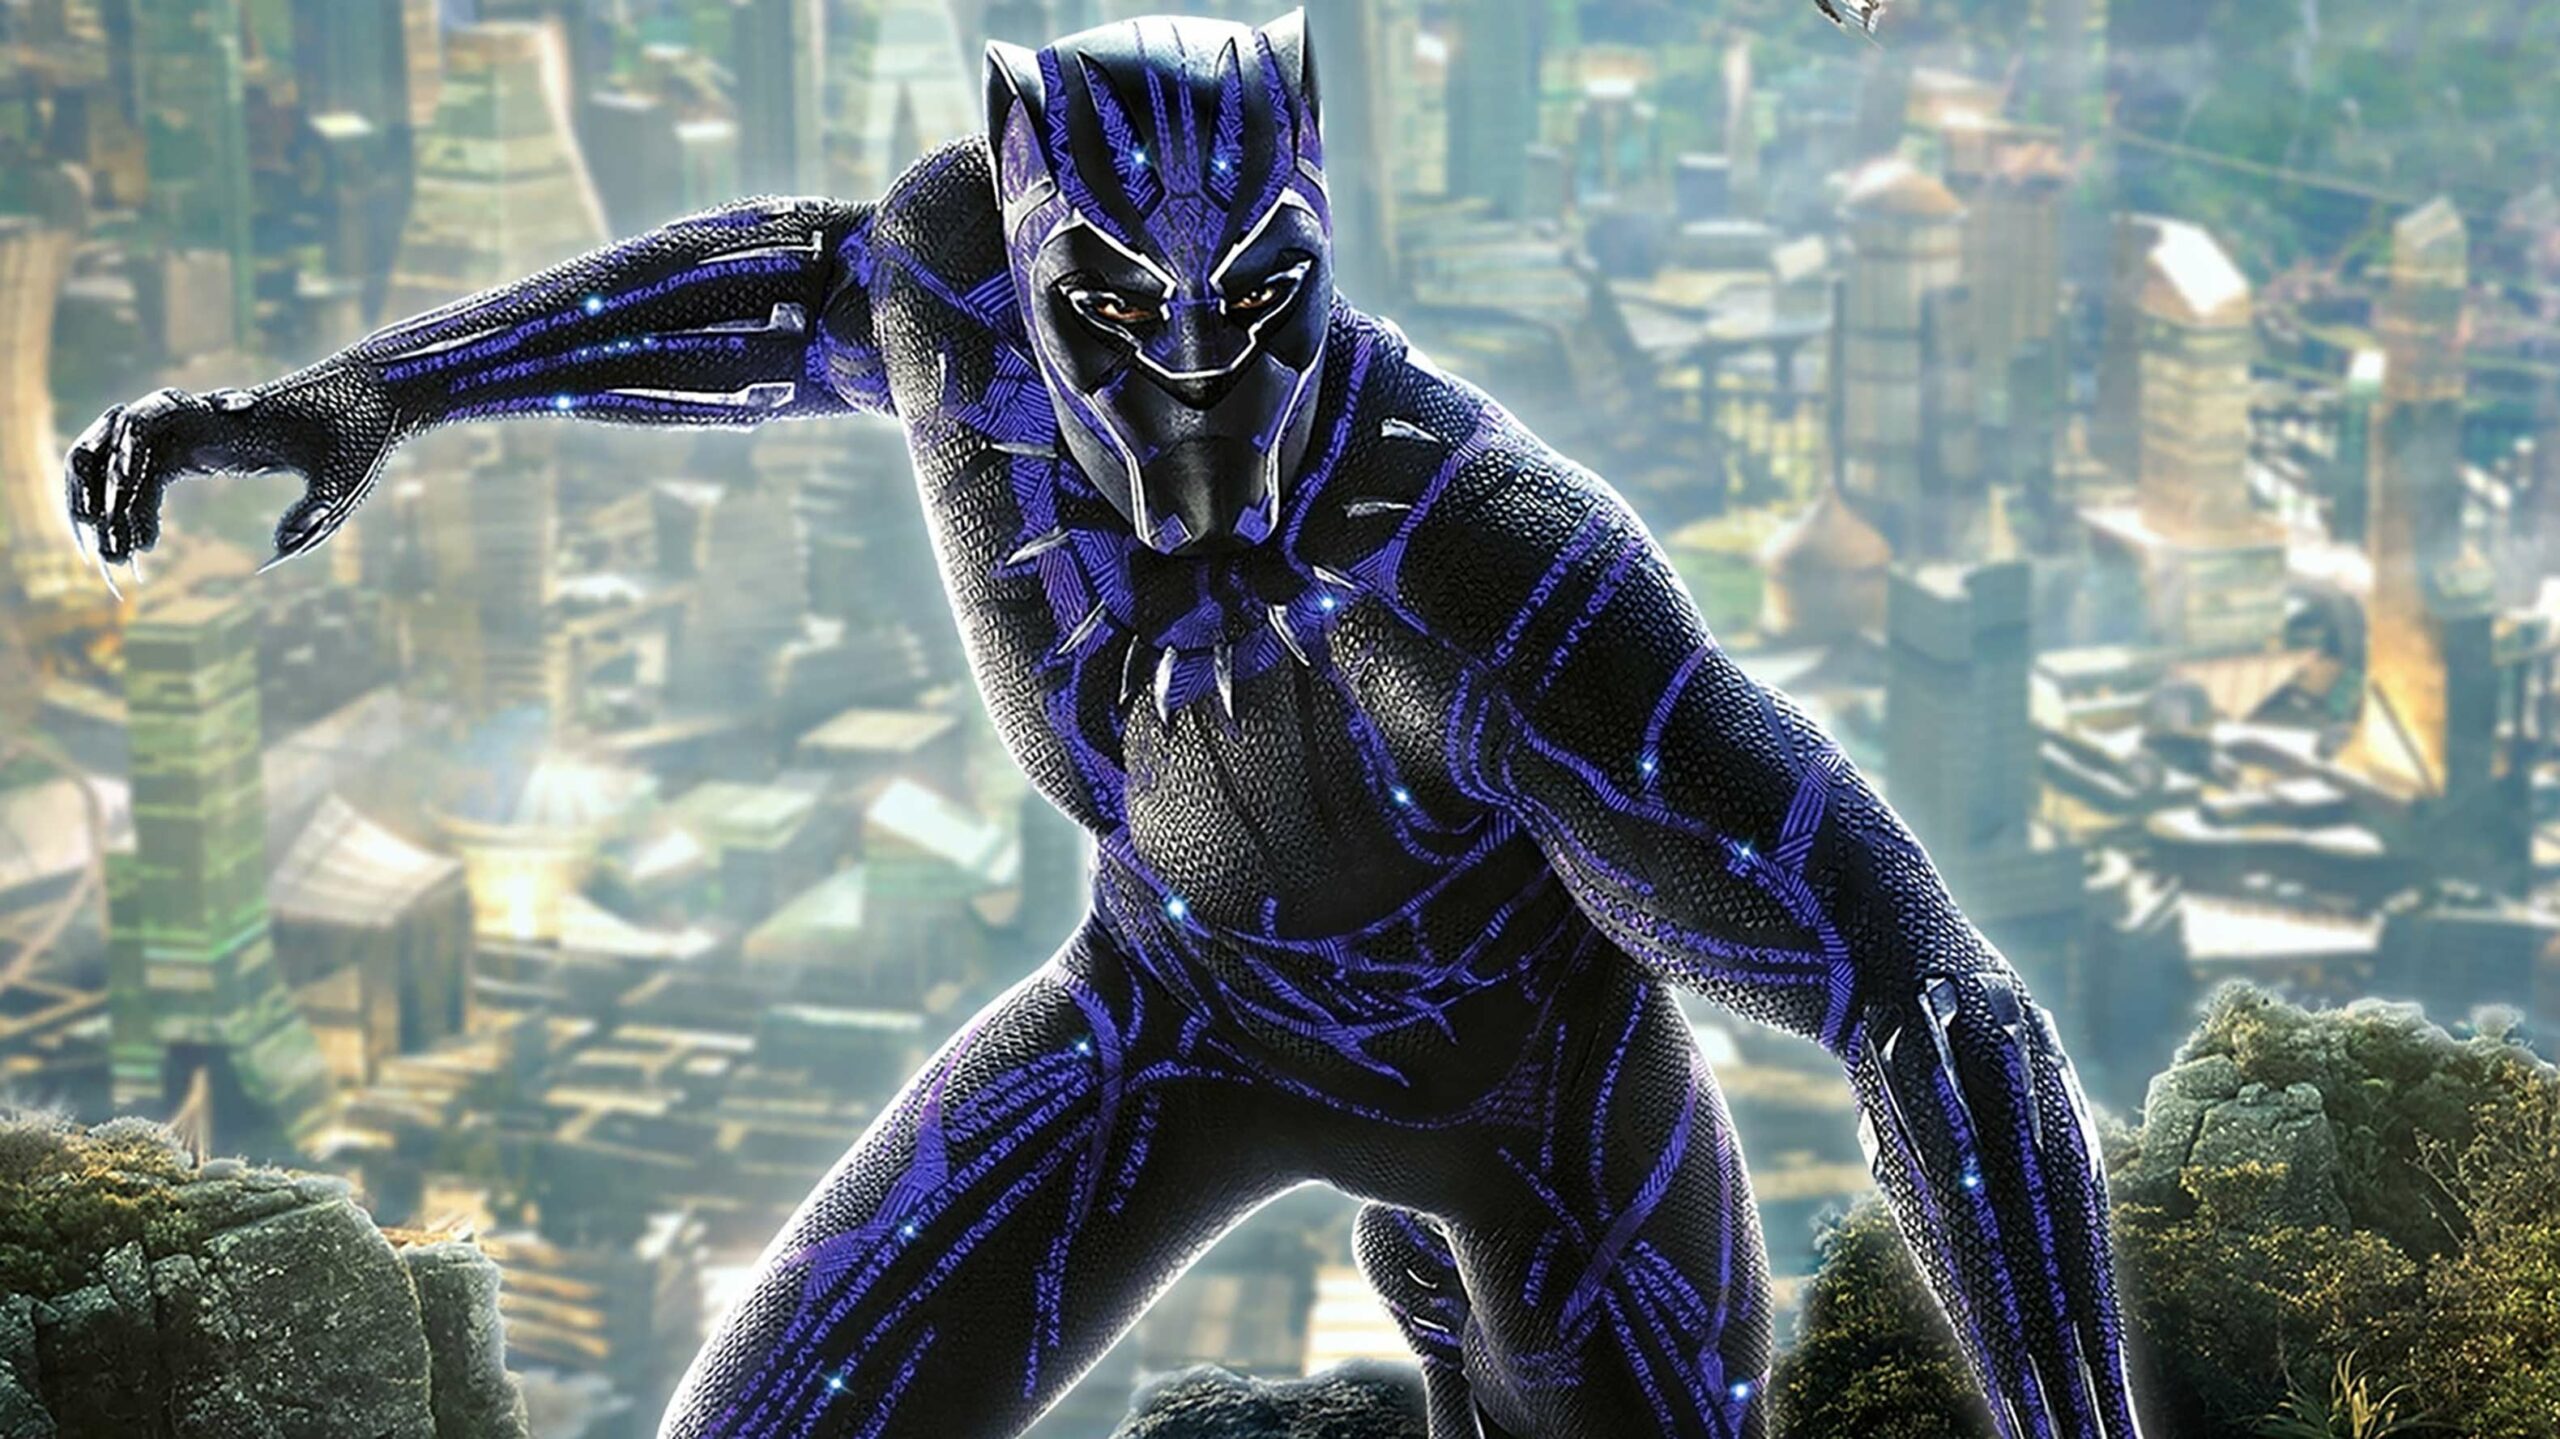 EA working on single-player, open-world Black Panther game: report